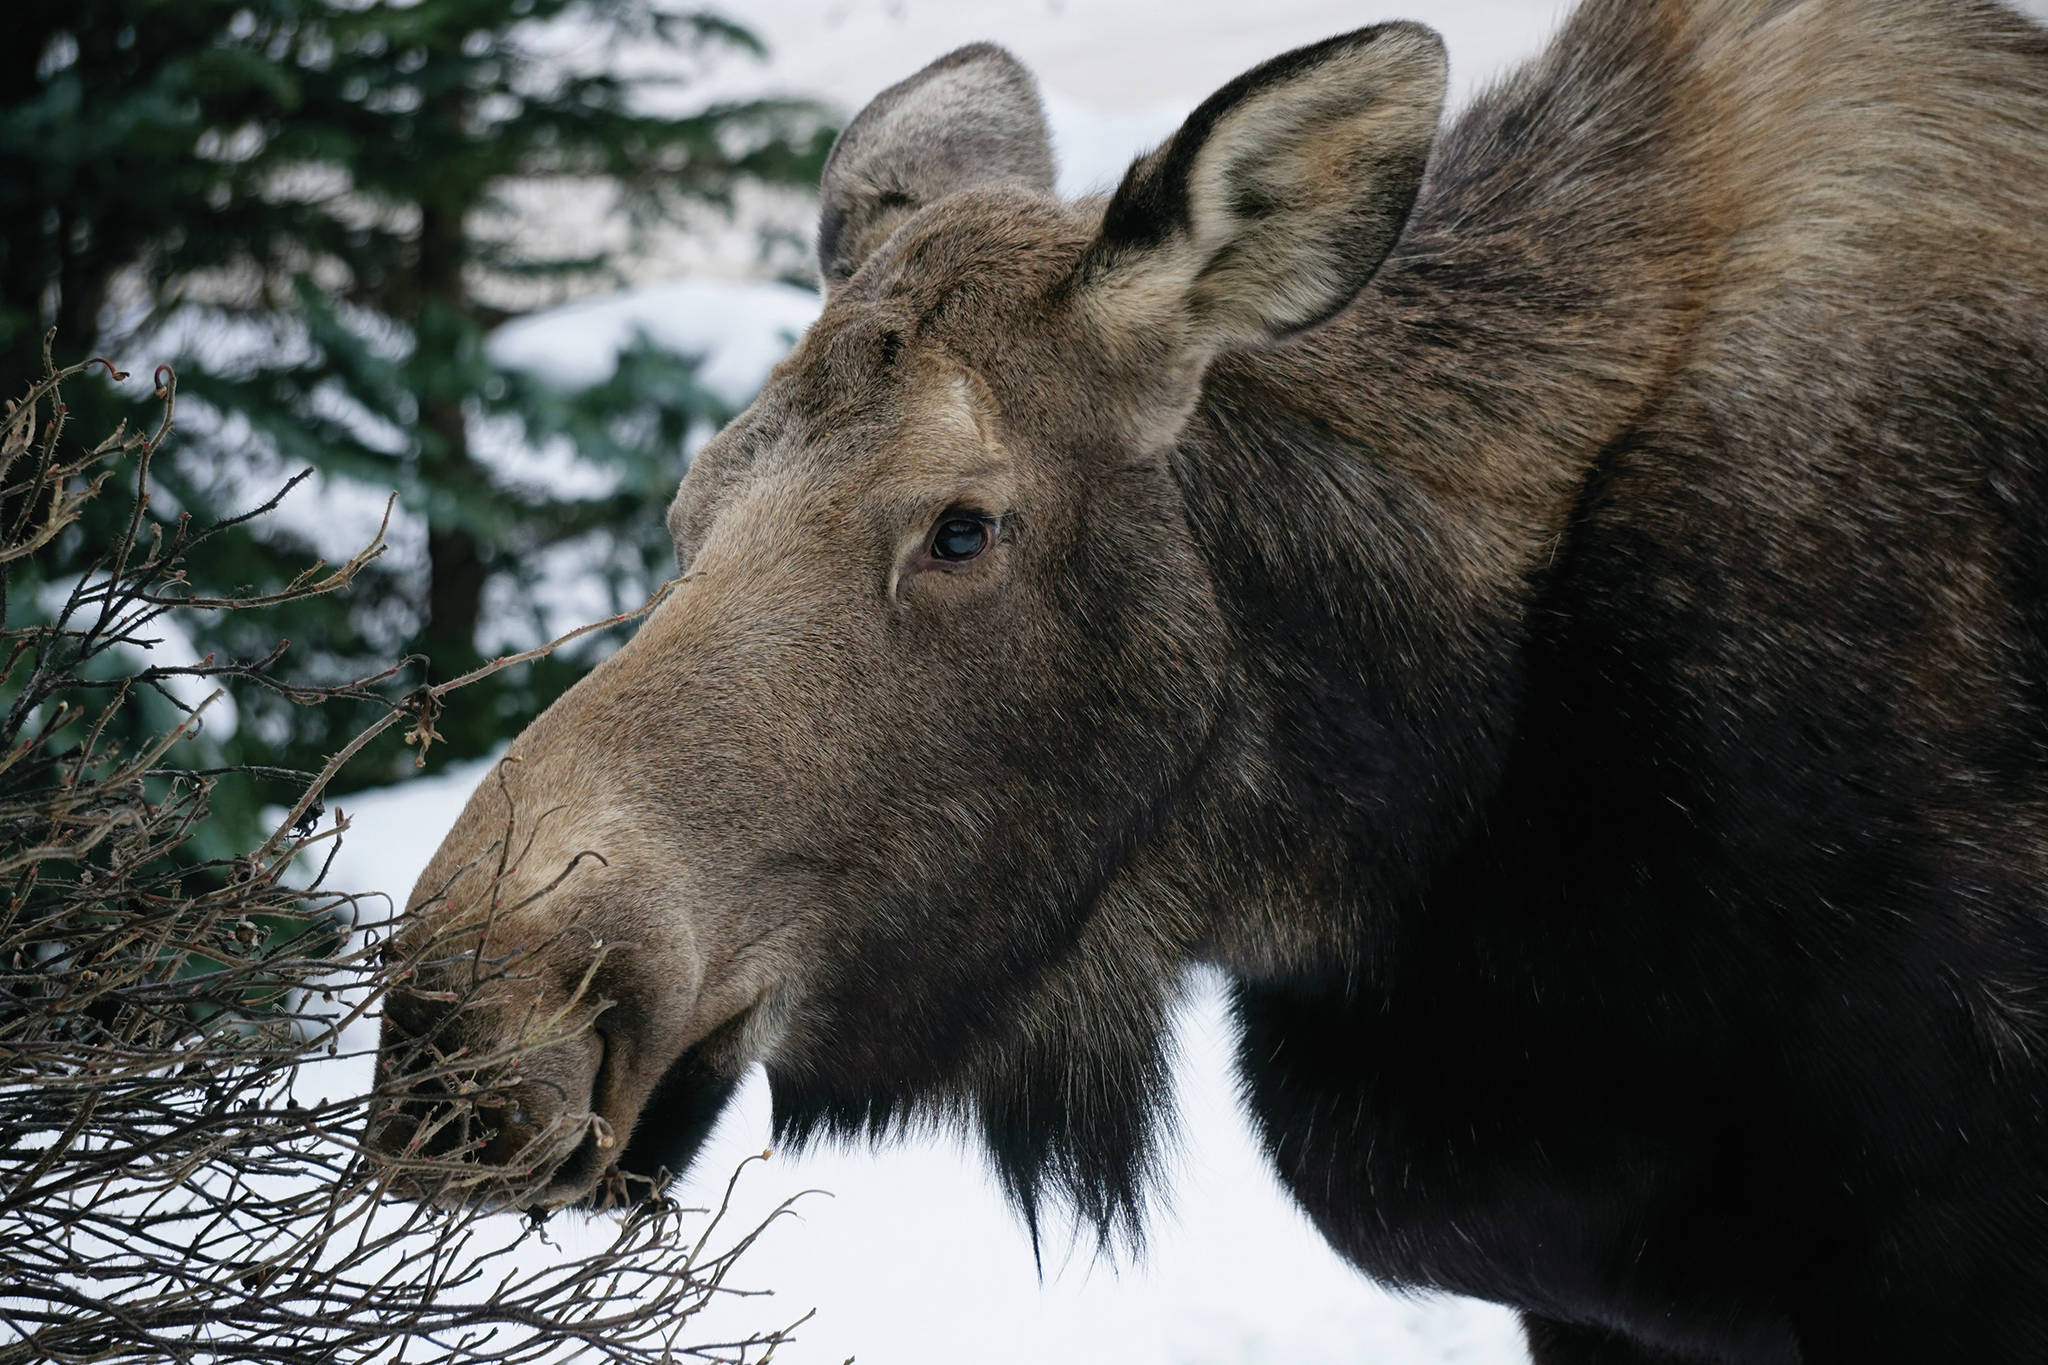 A moose feeds on a rose bush near the Homer News by Beluga Lake on Friday afternoon, March 6, 2020, in Homer, Alaska. (Photo by Michael Armstrong/Homer News)